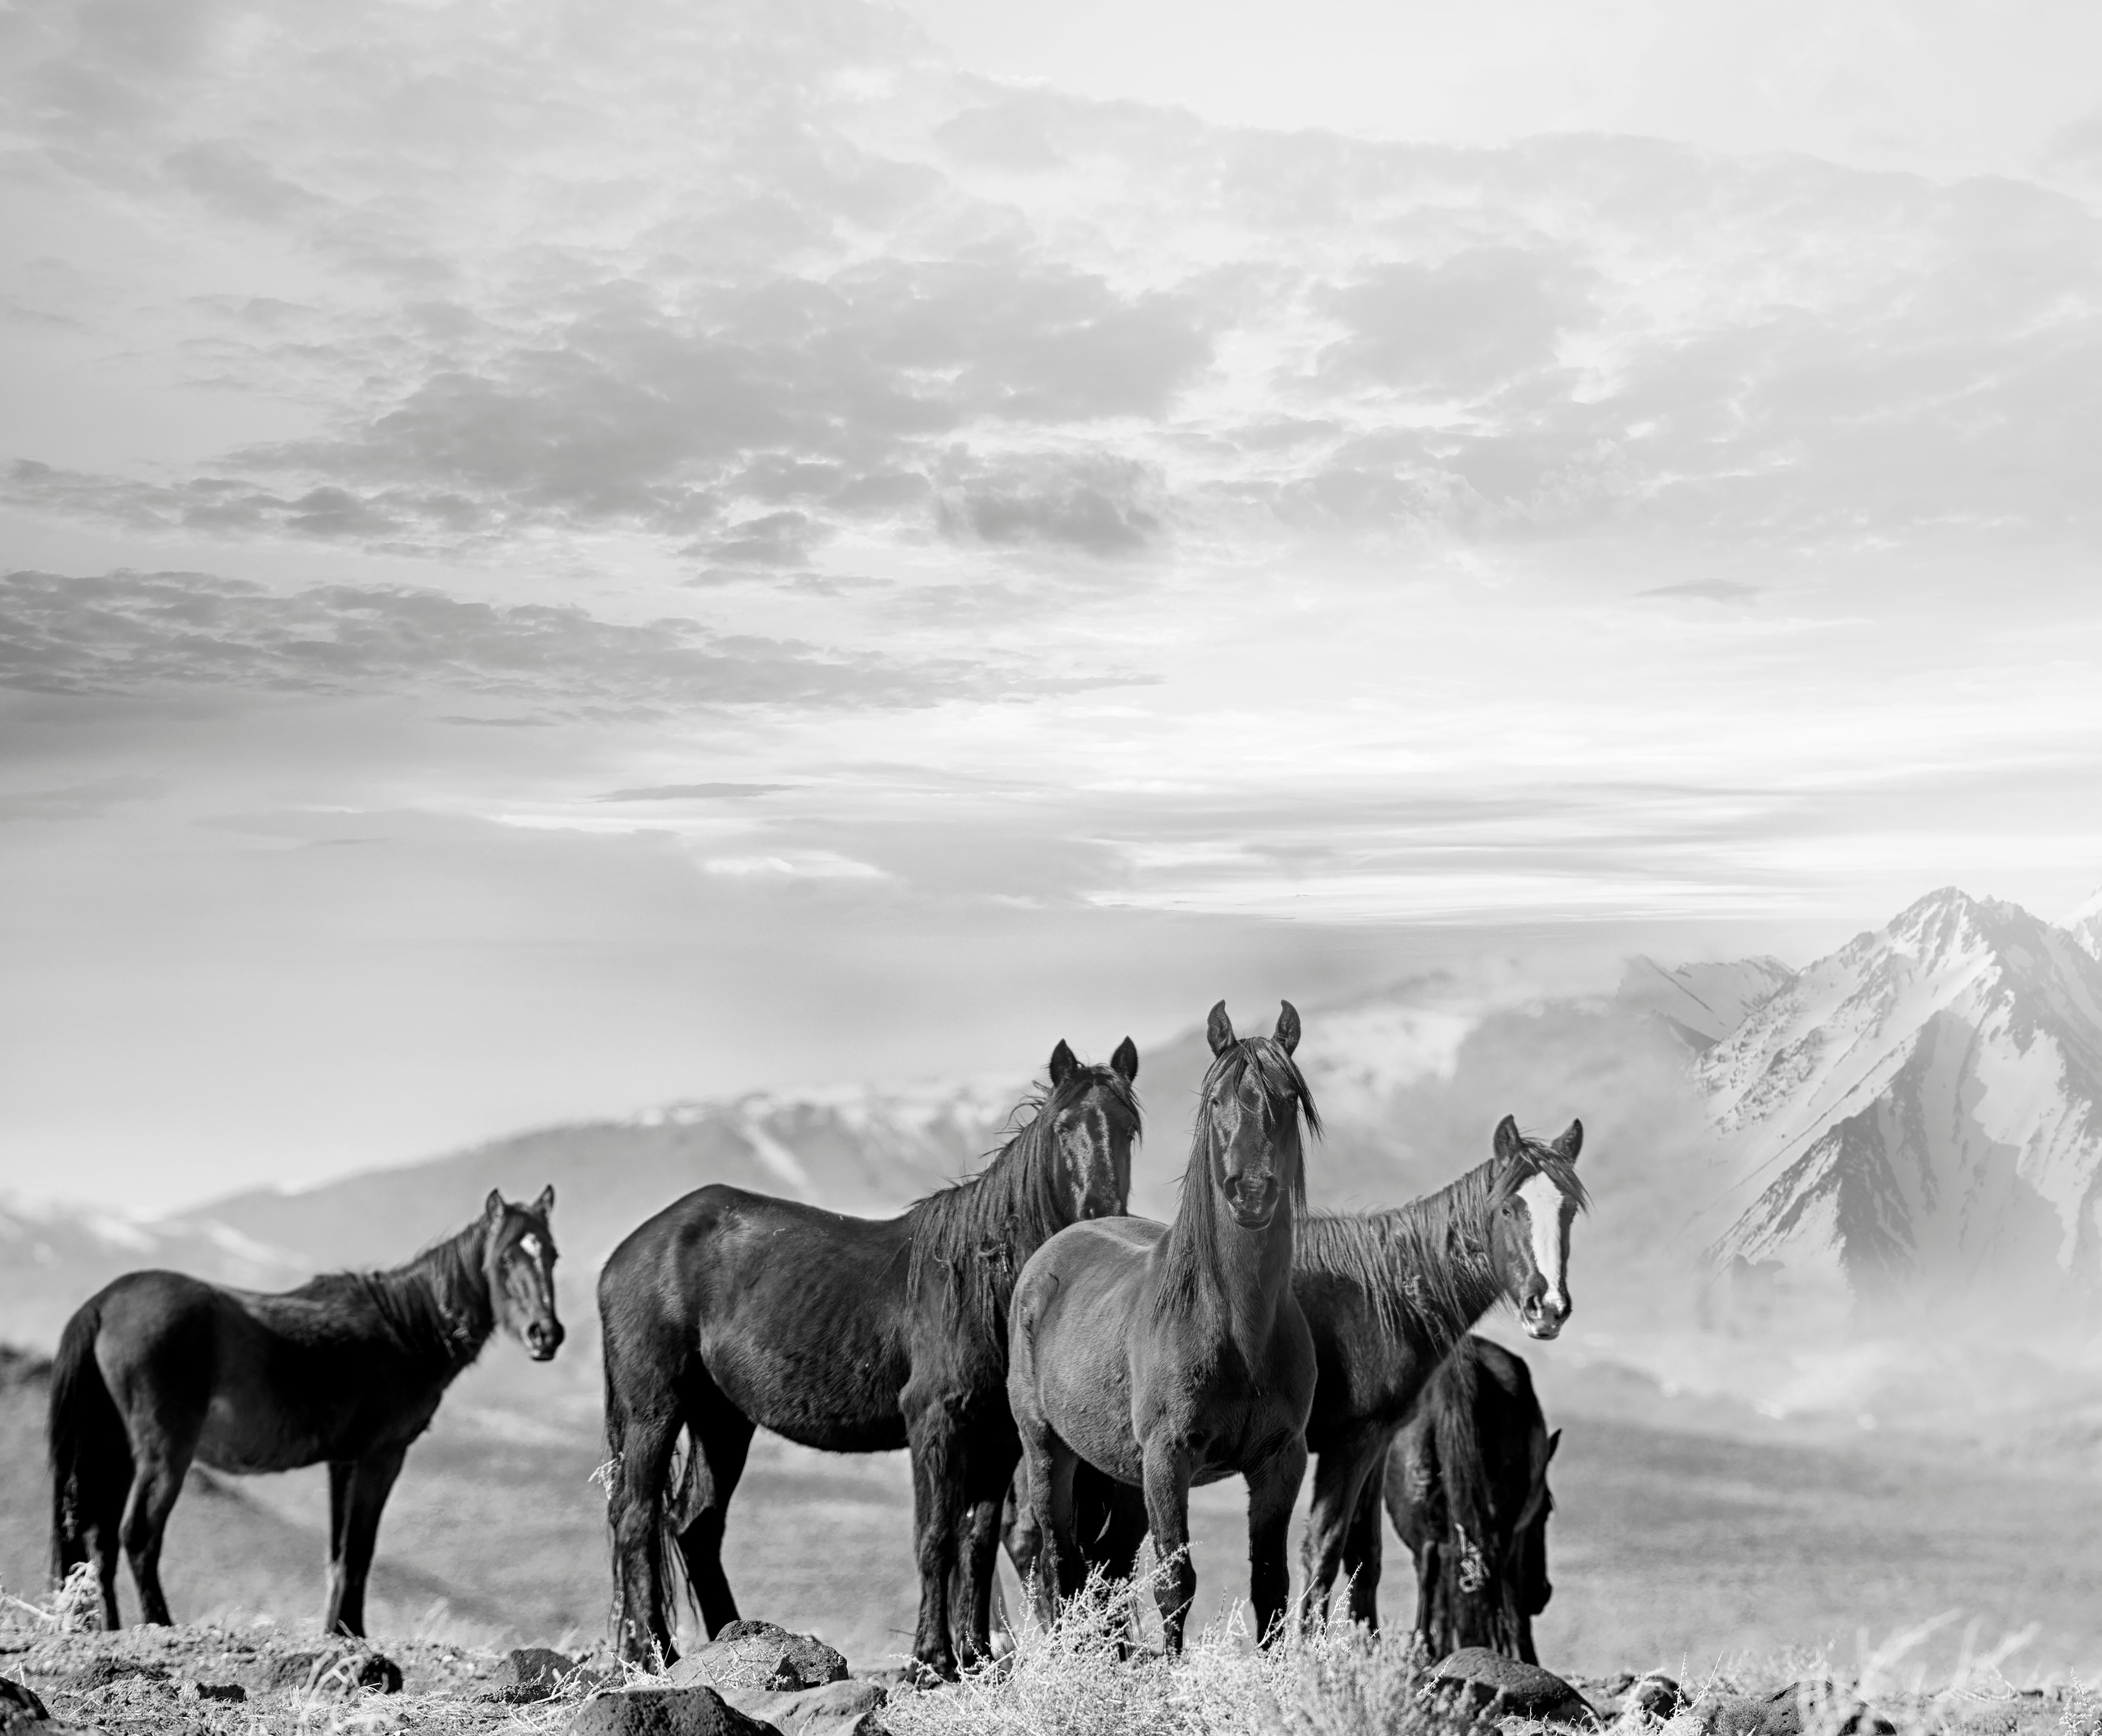 Shane Russeck Animal Print - High Sierra Mustangs 36x48 Black and White Photography Wild Horses, Mustangs